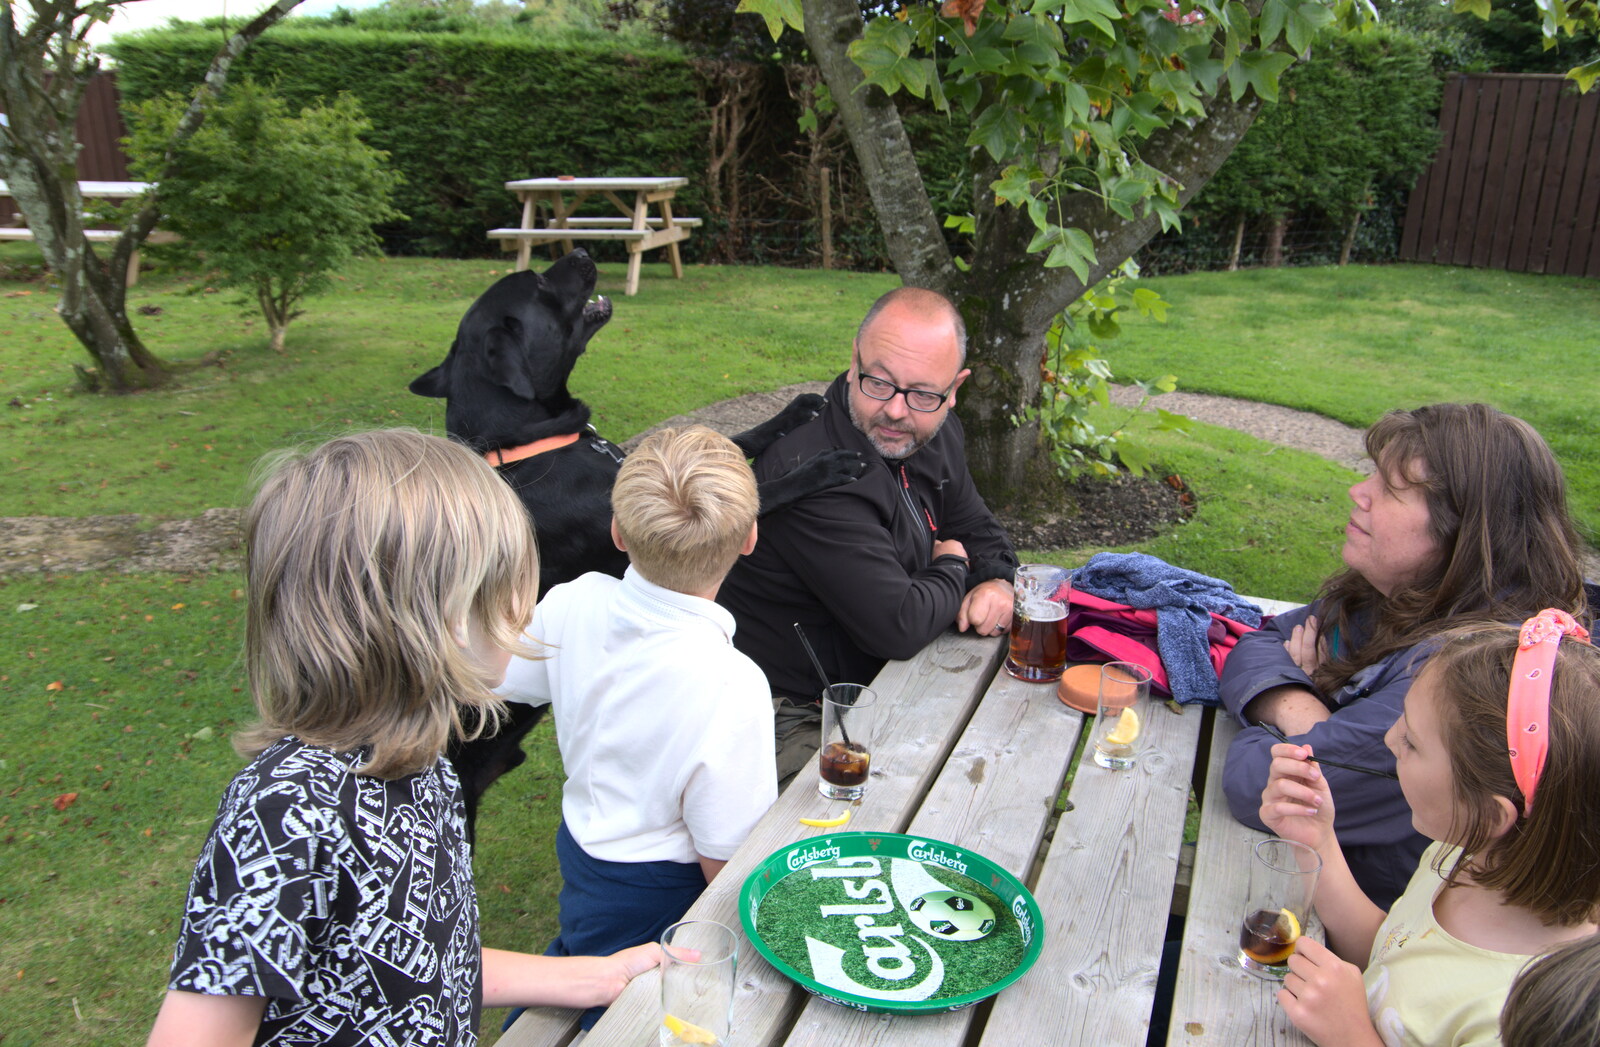 In the Tom Cobley beer garden from A Game of Cricket, and a Walk Around Chagford, Devon - 23rd August 2020